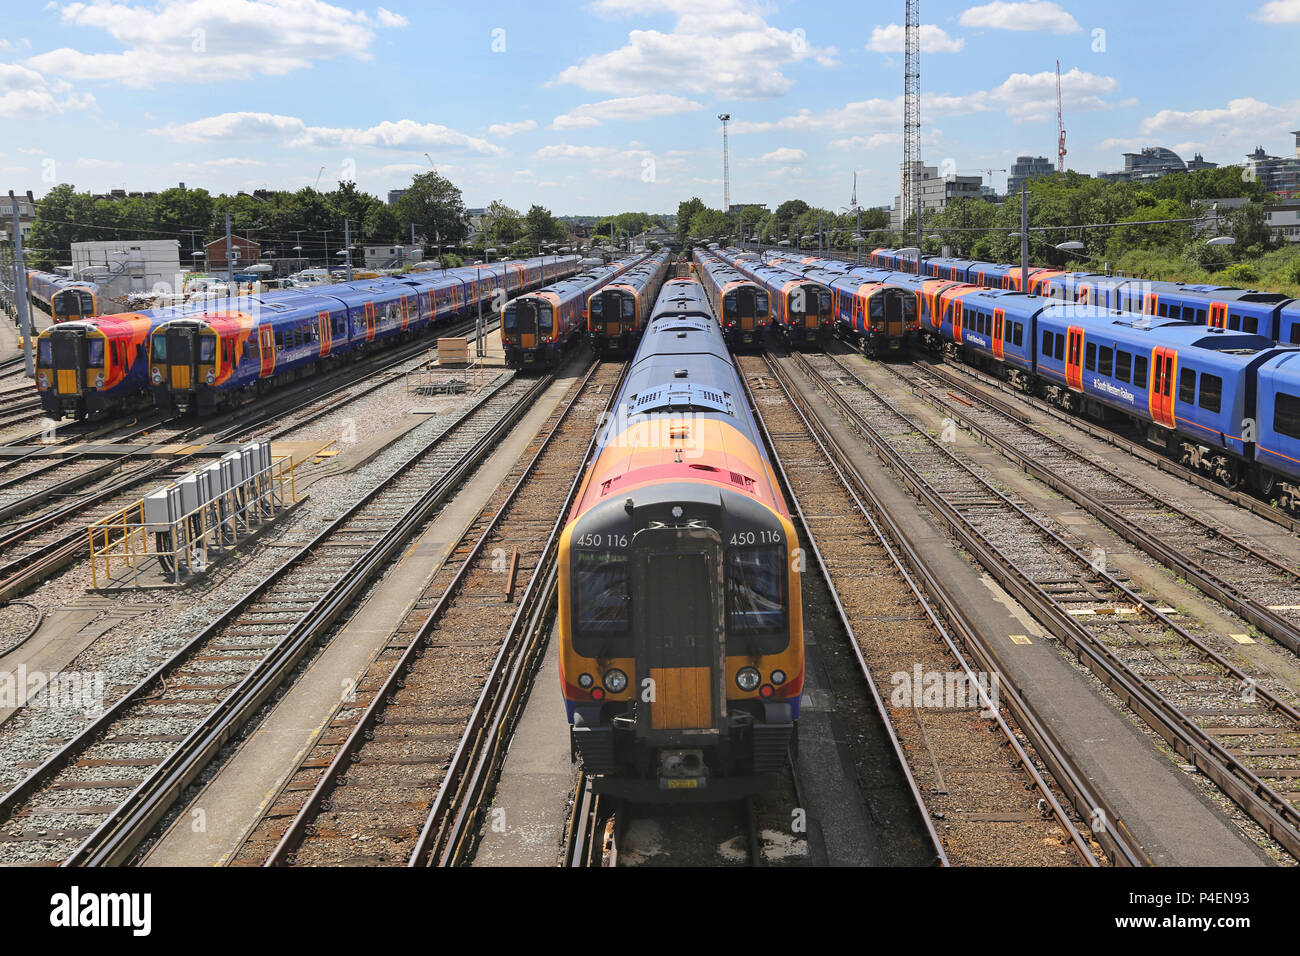 Newly rebranded South Western Railways type 450 rolling stock stored on sidings at Clapham Junction Station in south London, UK Stock Photo